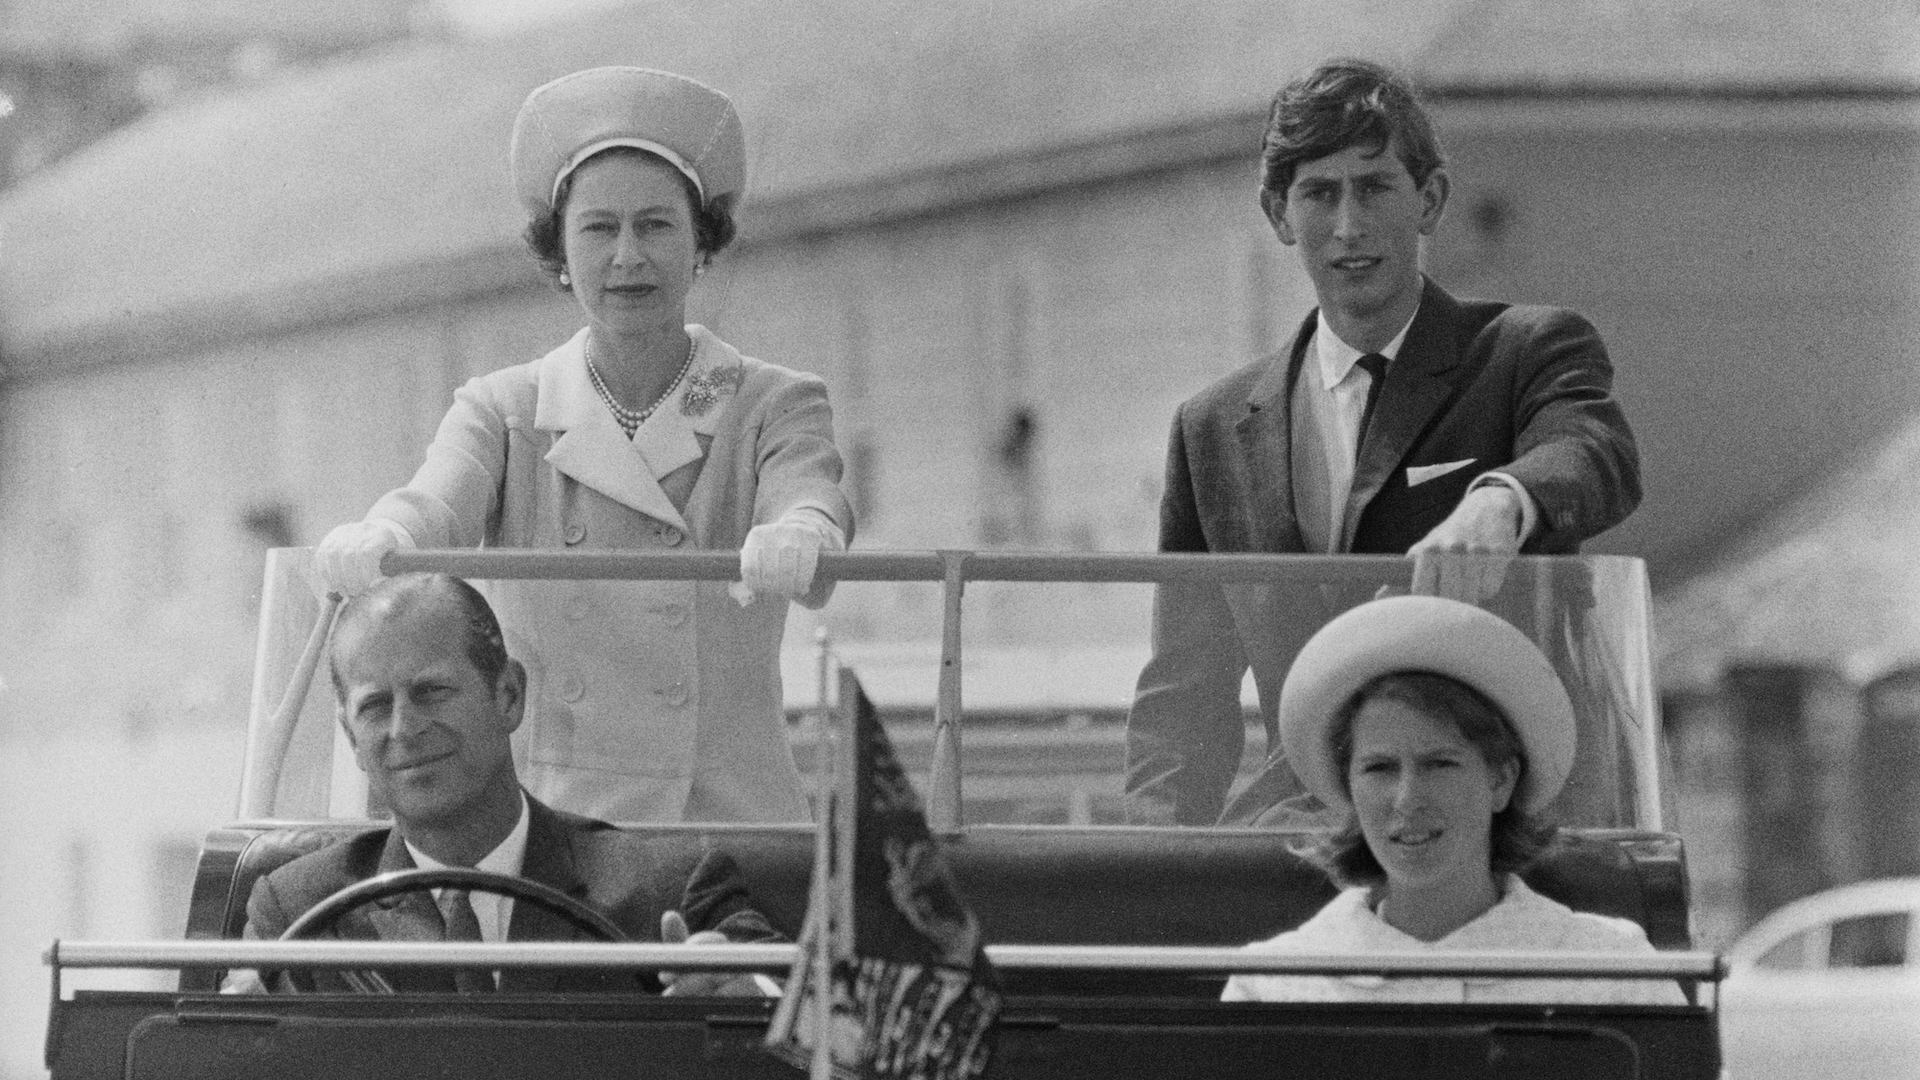 <p>                     While the royals love jetting abroad, they have also frequently vacationed closer to home. This includes the Isles of Scilly, an archipelago off the coast of Cornwall, where King Charles and Princess Diana visited in 1982 when she was pregnant with Prince William. The monarch might have been inspired by his trip there in 1967 with Queen Elizabeth, Prince Philip and Princess Anne.                   </p>